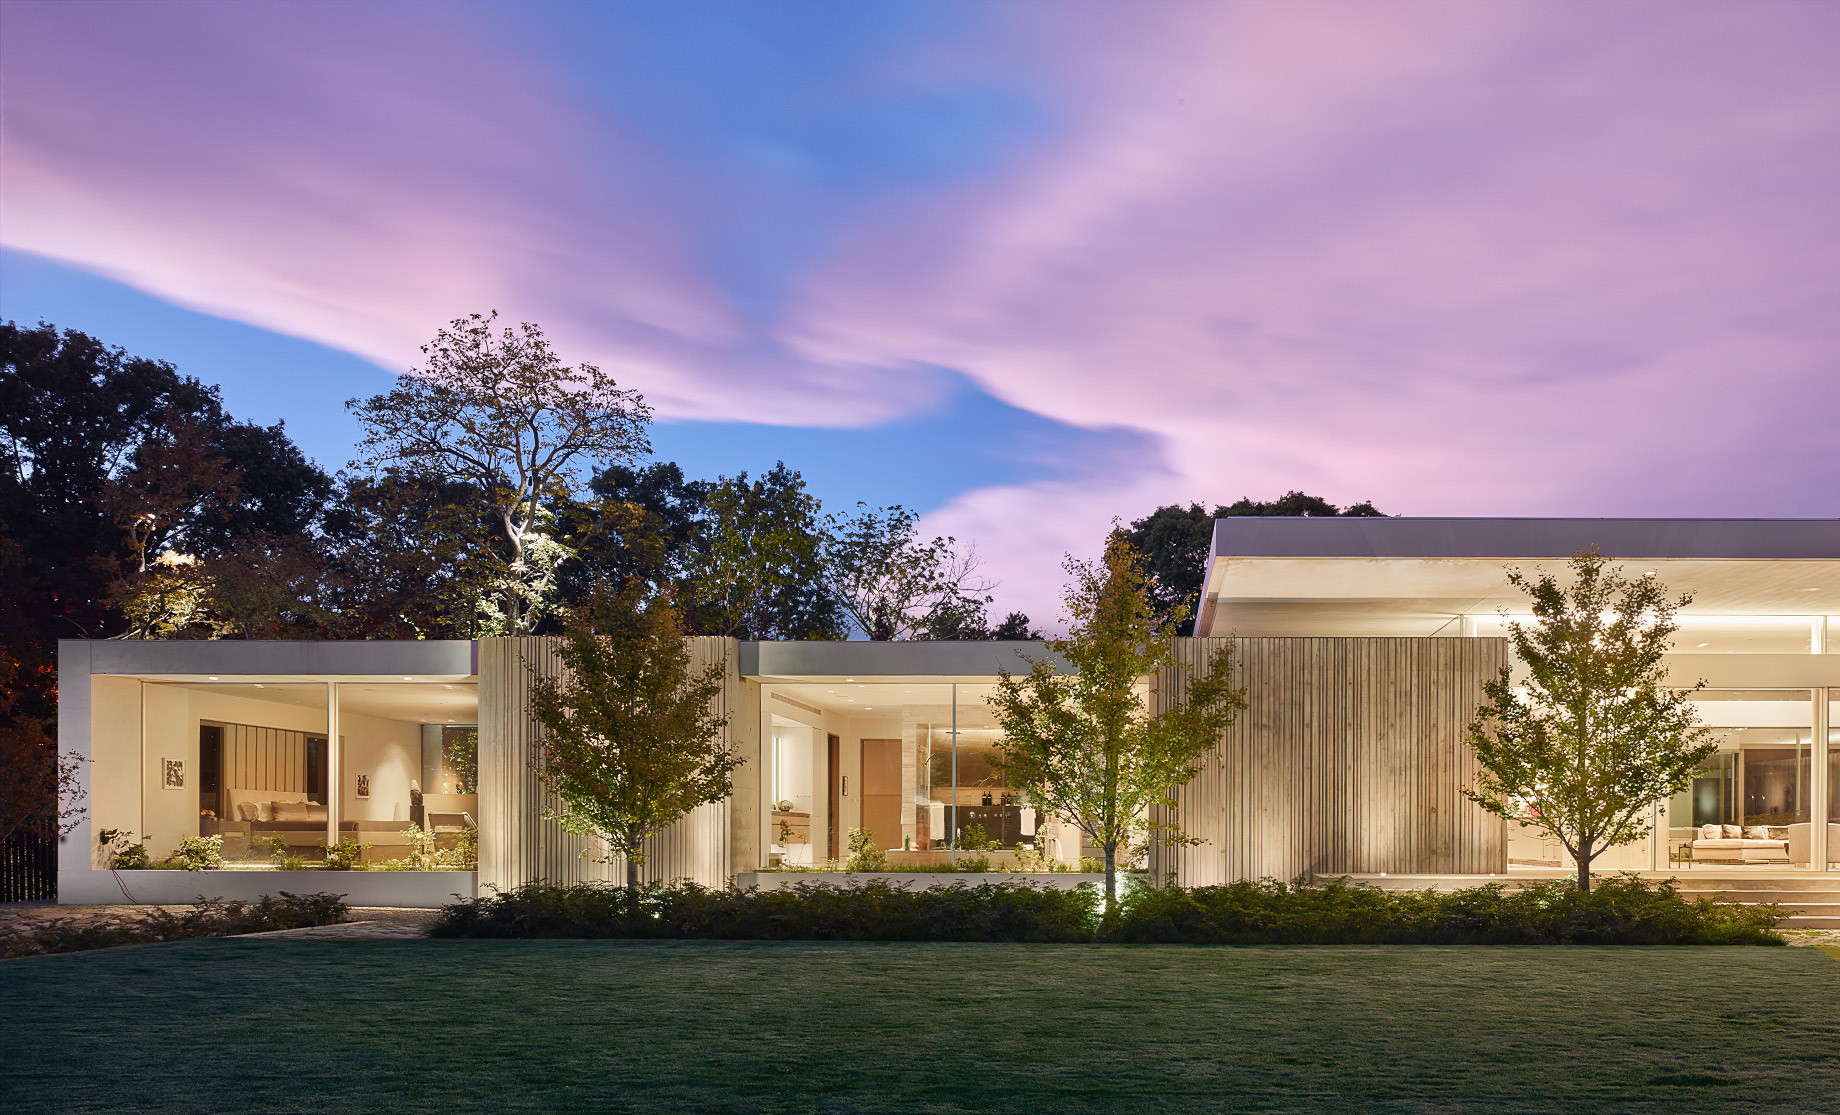 029 – Preston Hollow Brutalist Architecture Residence – Dallas, TX, USA – Sunset Exterior View